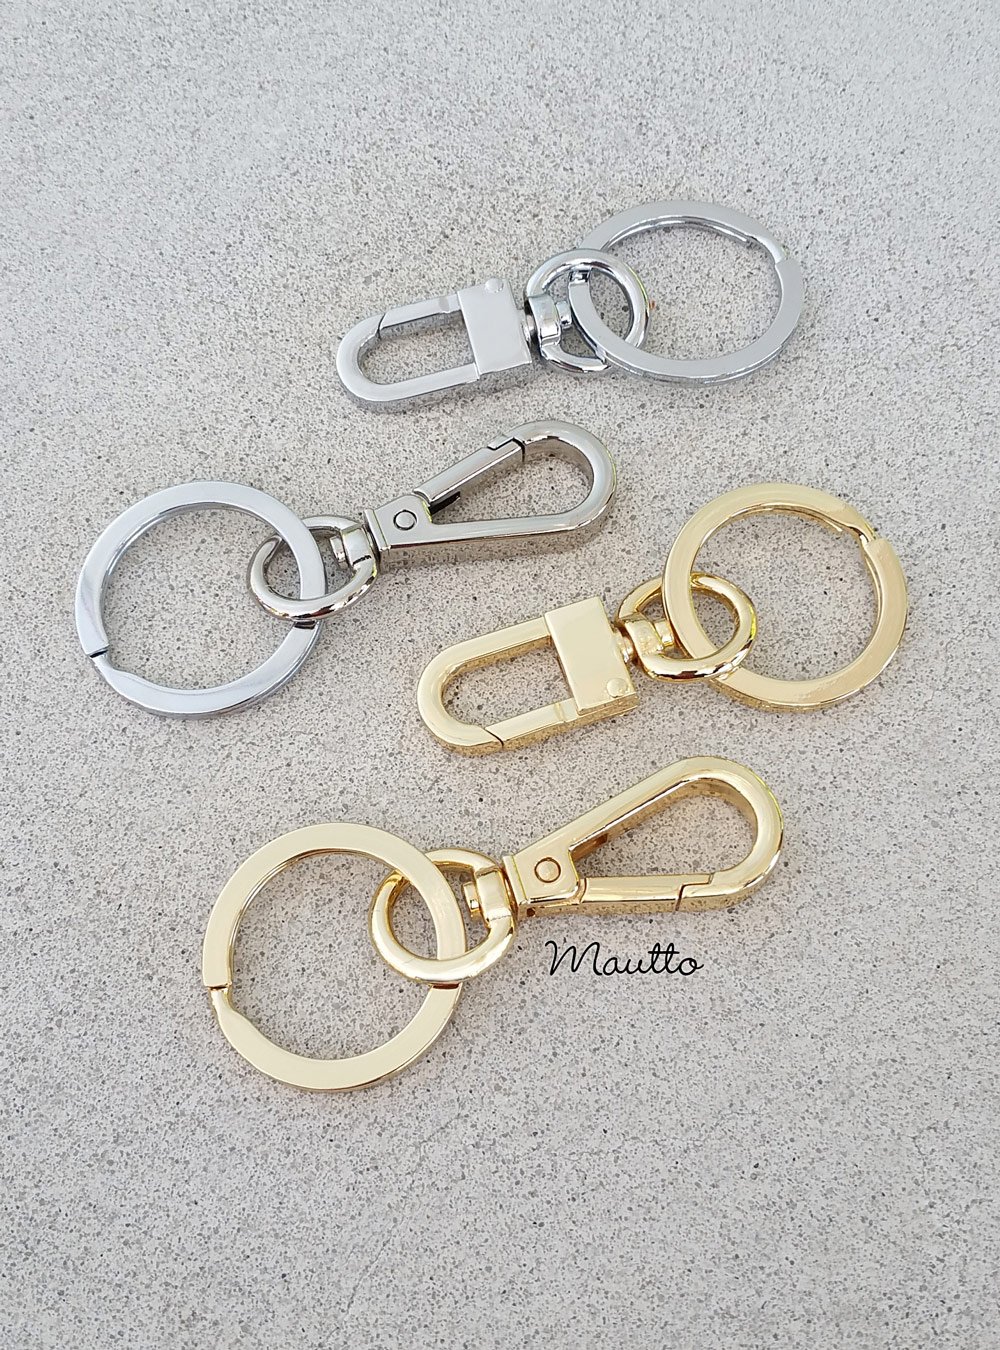 Key Ring/Chain Accessory with Swiveling Clip - Gold or Nickel Finishes - Choose Clip Style ...